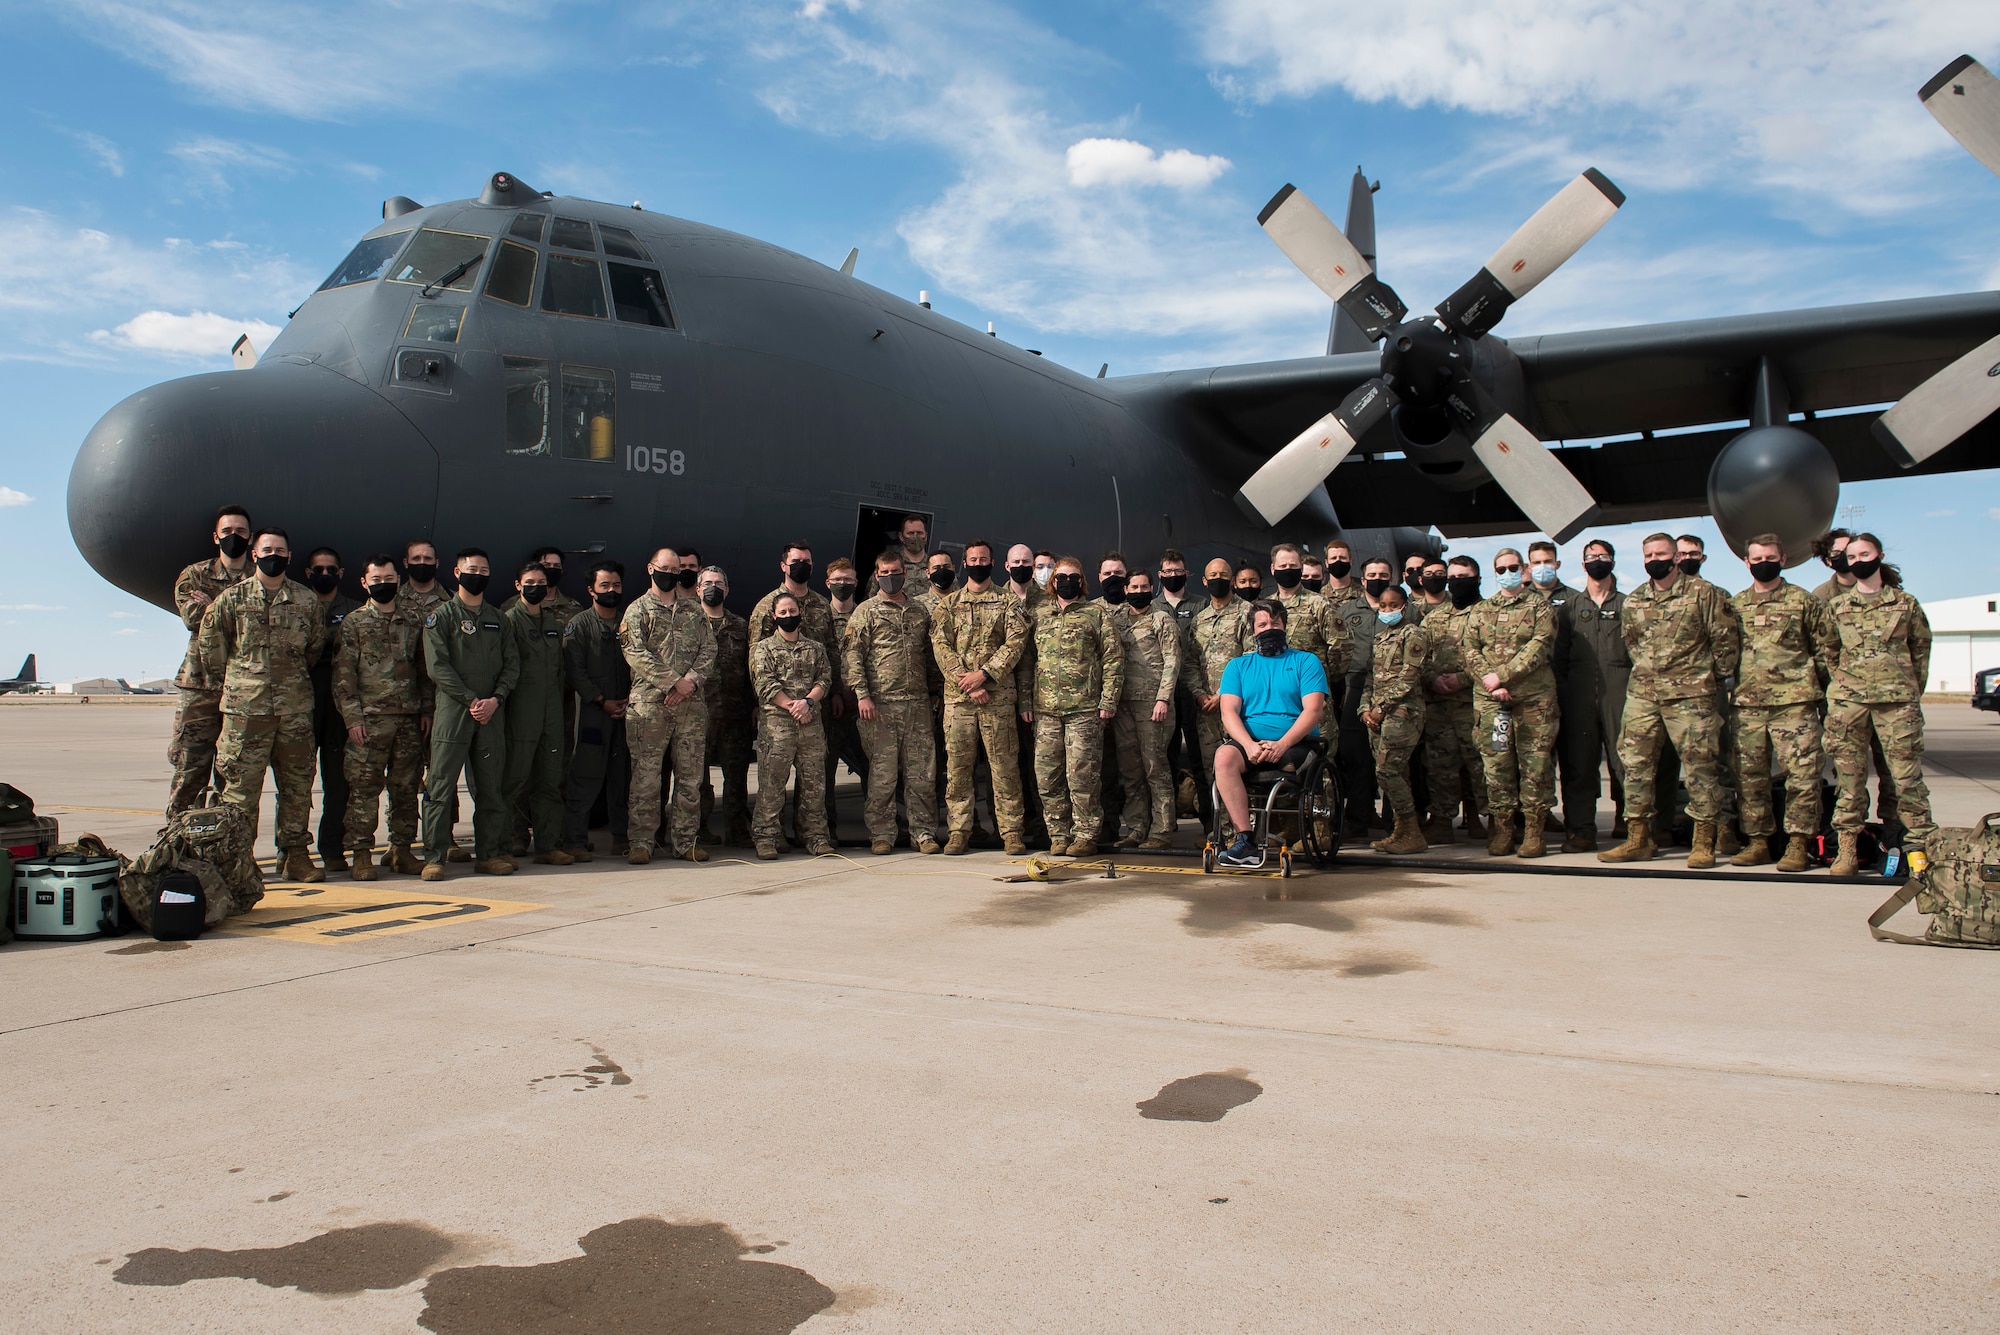 Members of the 551st Special Operations Squadron stand together for a group photo after a fini flight at Cannon Air Force Base, N.M., April 29, 2021. The 551 SOS will be standing down June 15, 2021. (U.S. Air Force photo by Senior Airman Vernon R. Walter III)